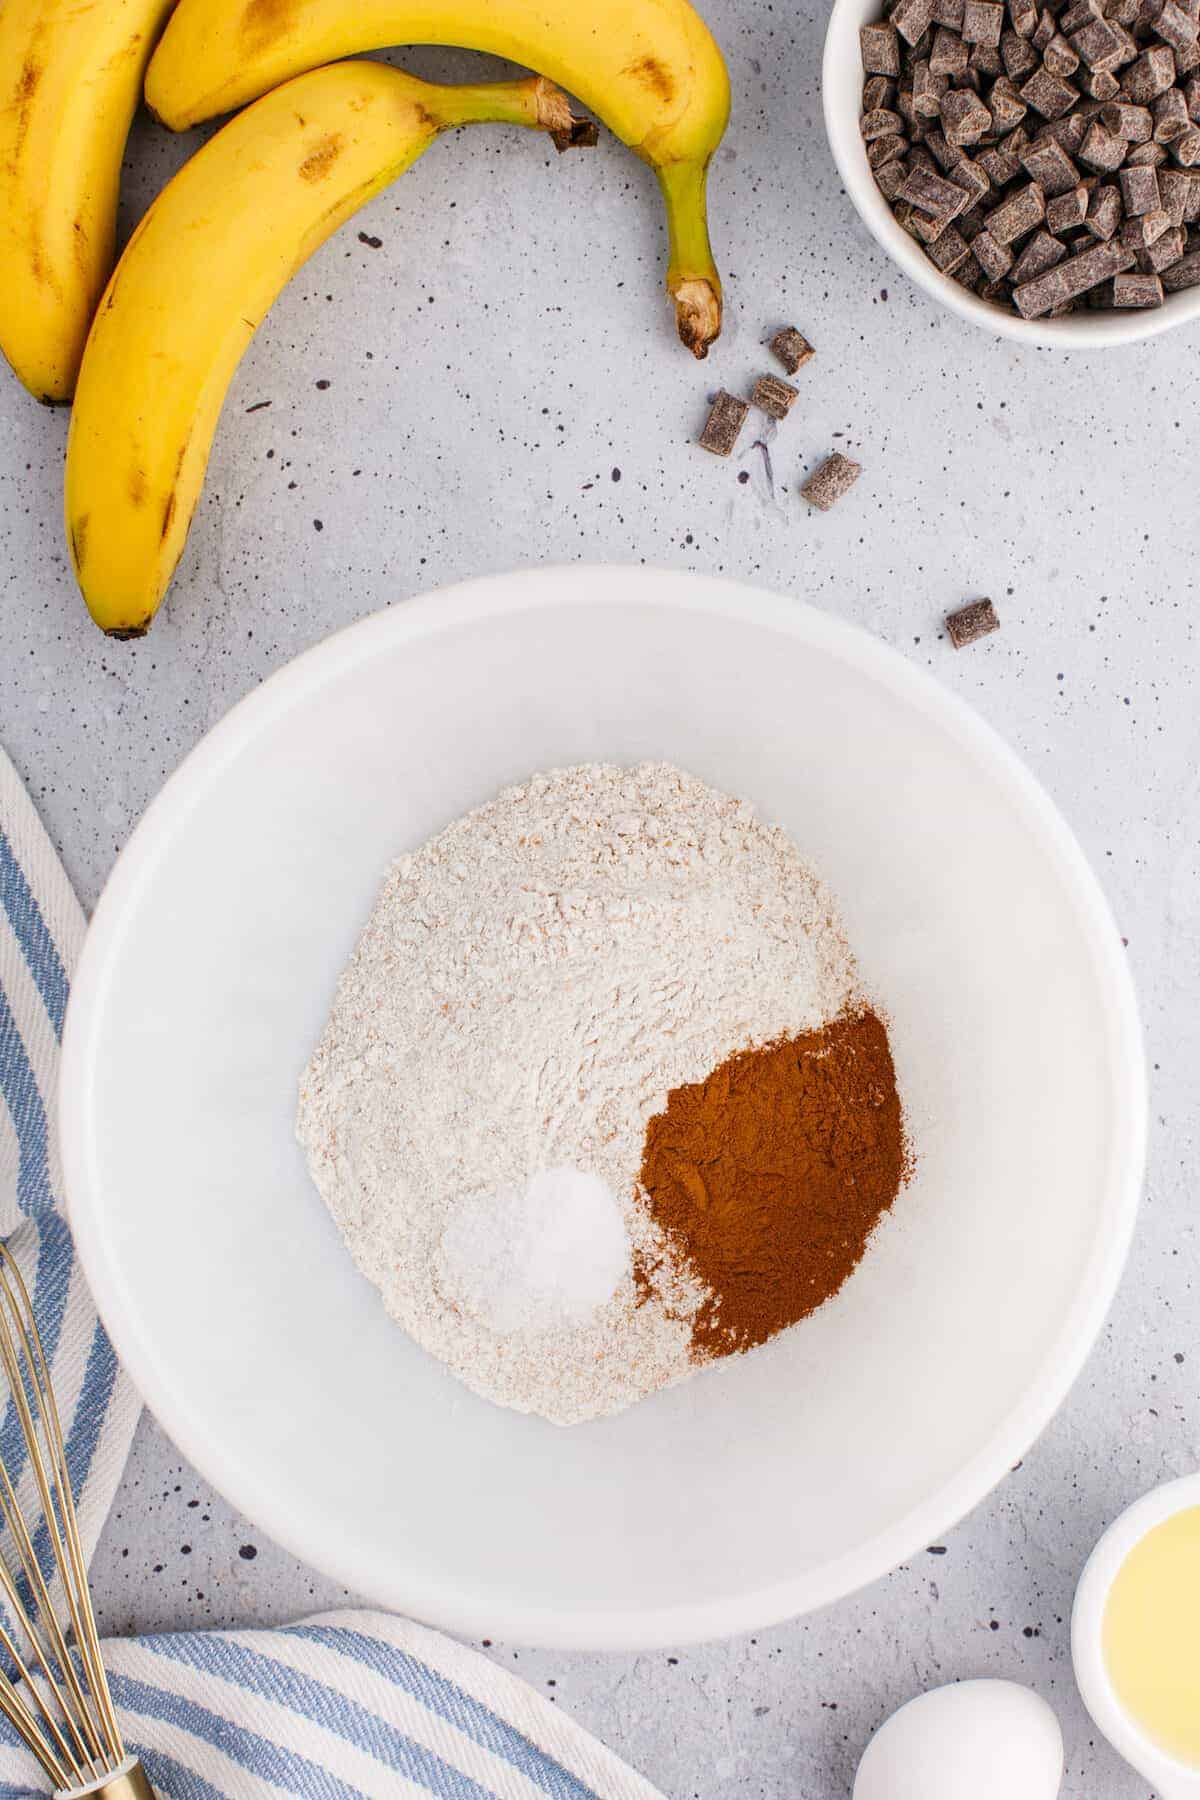 dry ingredients for the banana bread in a large white bowl.